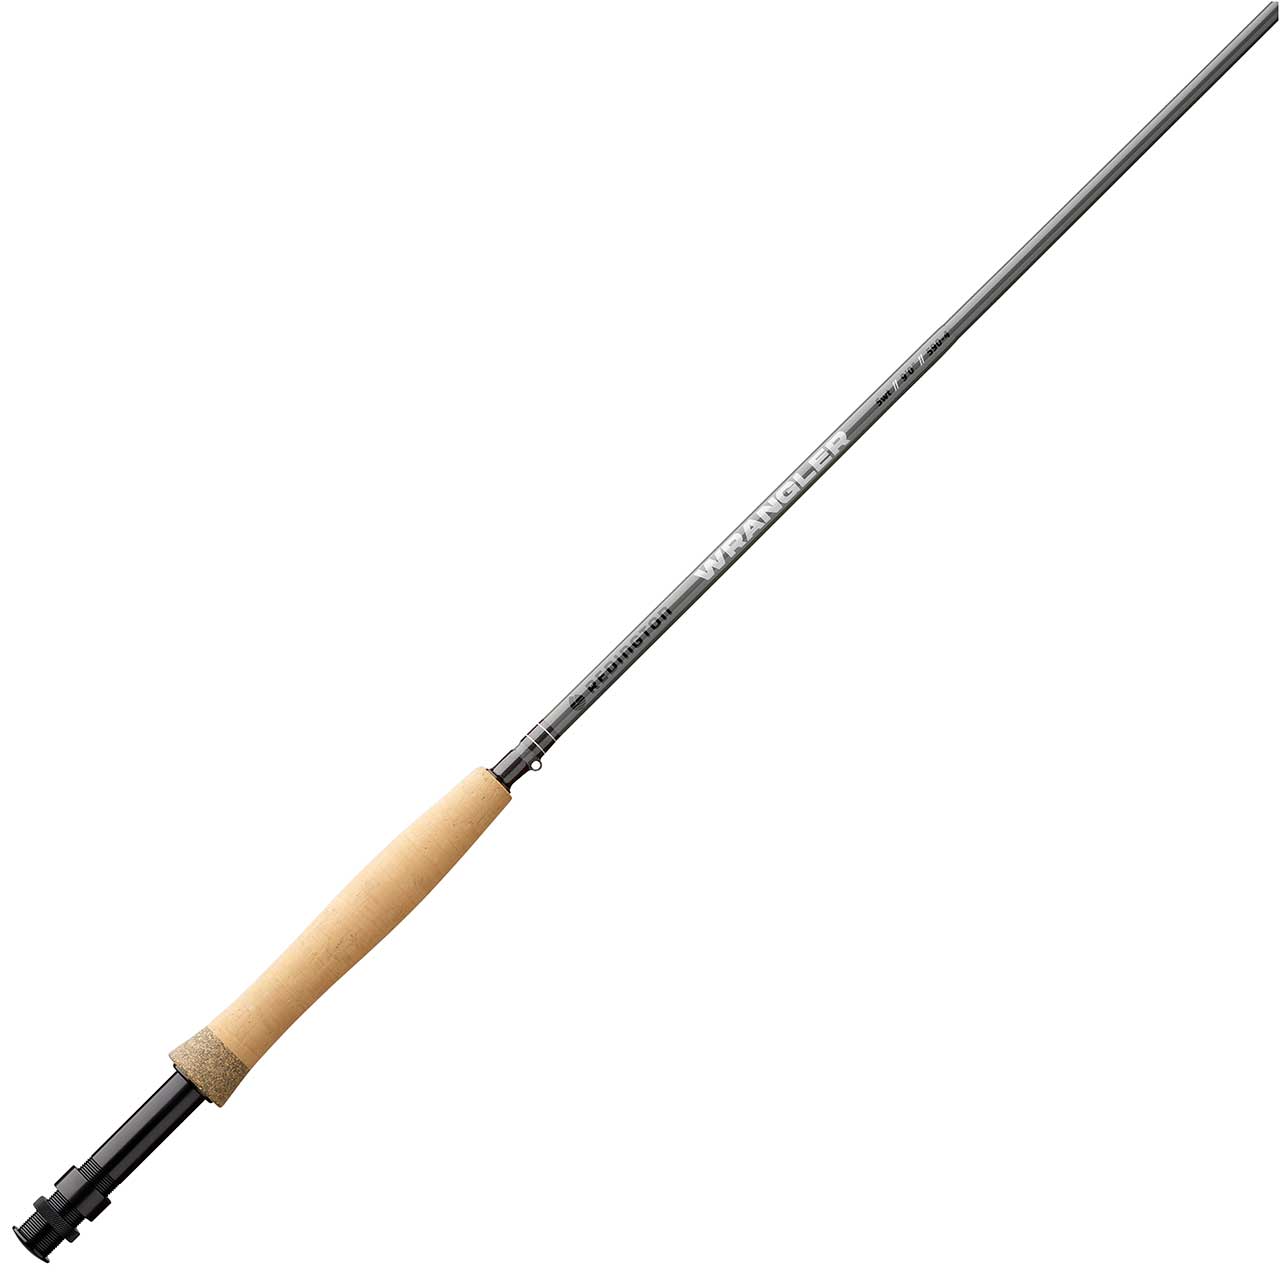 G.Loomis IMX-PROv2 490-4 Freshwater Fly Rod - 9'- 4wt - 4pc - FREE FLY LINE